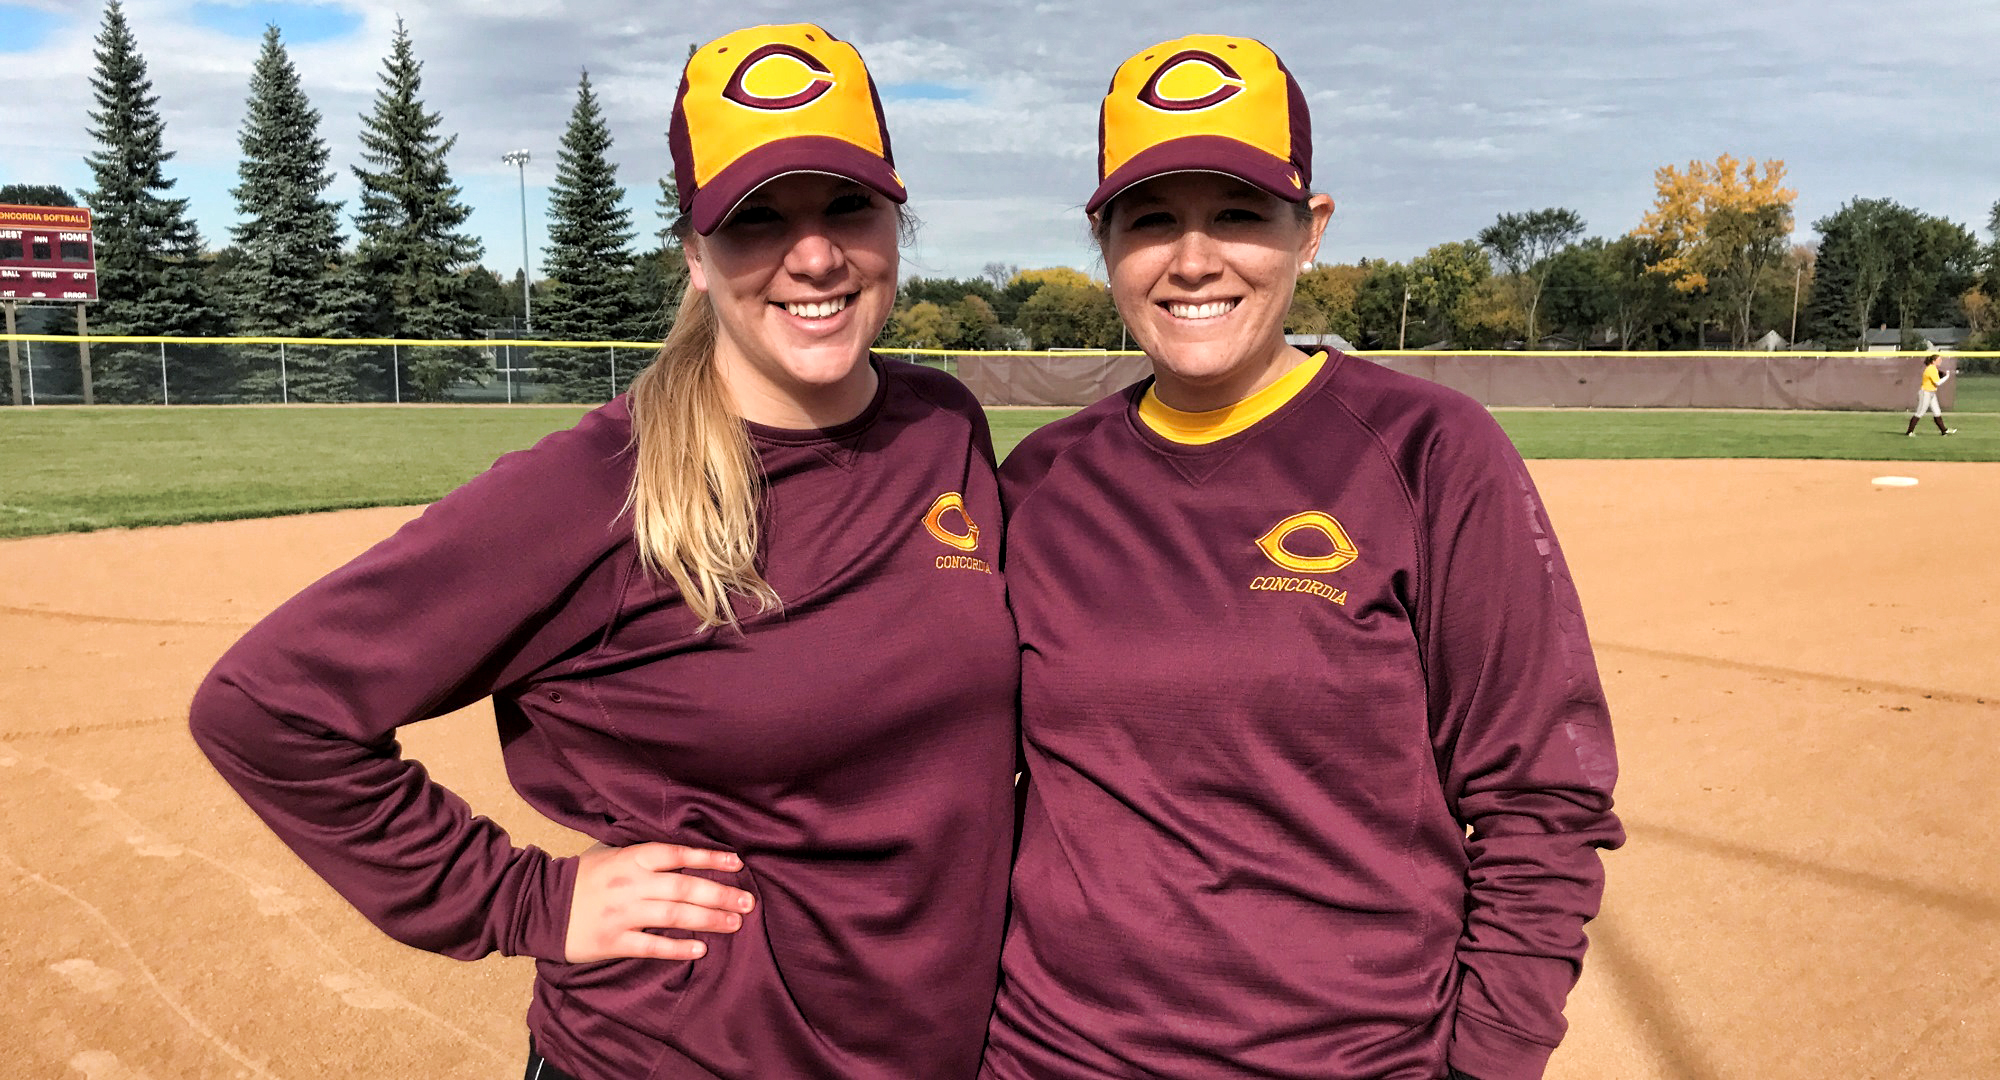 Concordia assistant coaches Krista Menke (L) and Bonnie (Belin) Carrete both played softball at NCAA Division I Meet.